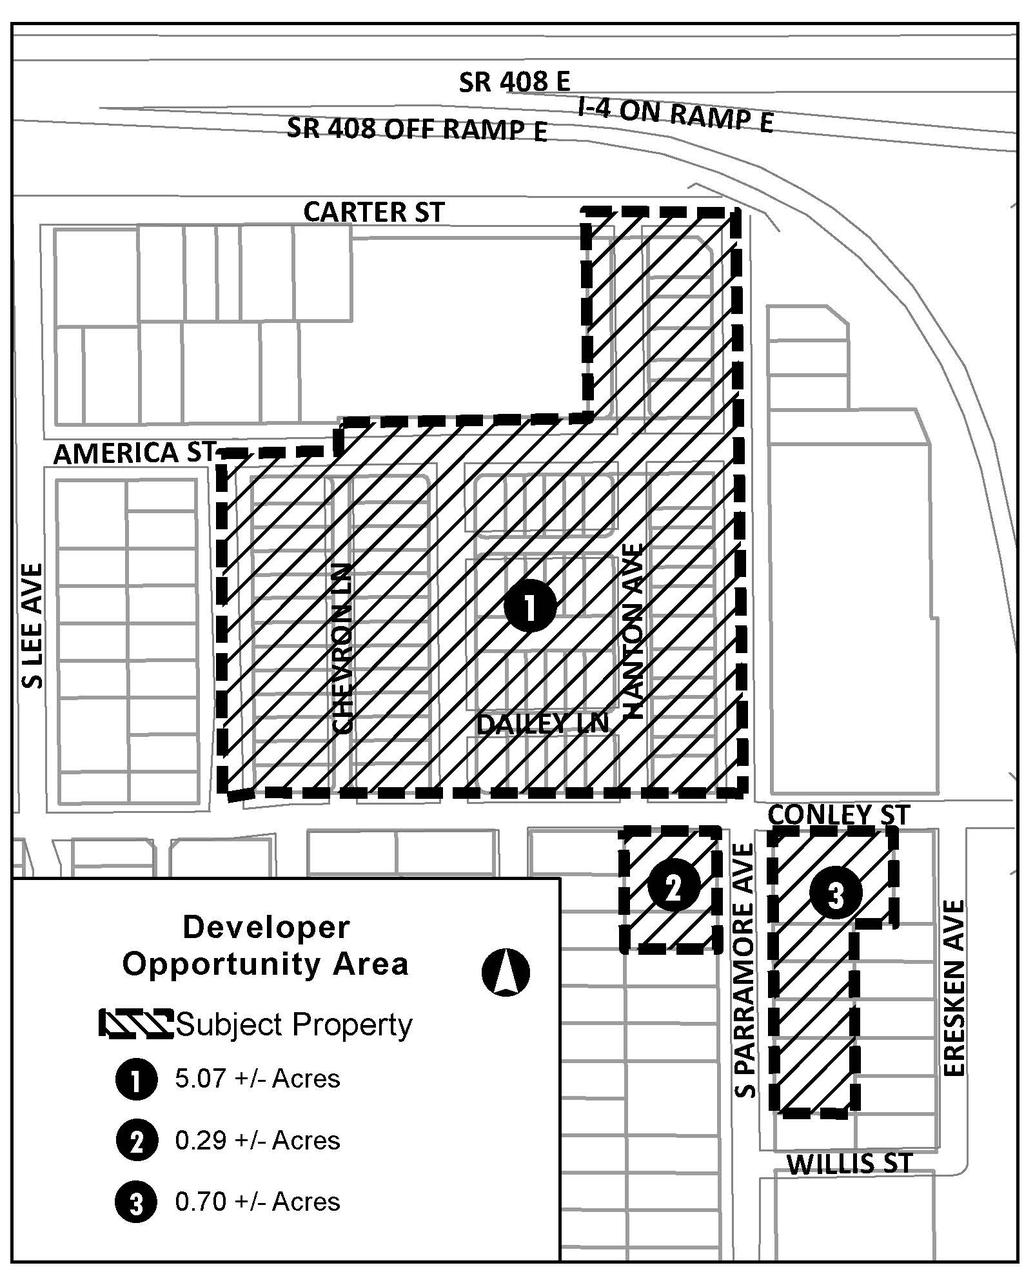 CITY/CRA VISION The City/CRA envisions a mixed income development consisting of primarily family-oriented housing, incorporating meaningful open spaces or gathering areas into the Project and other